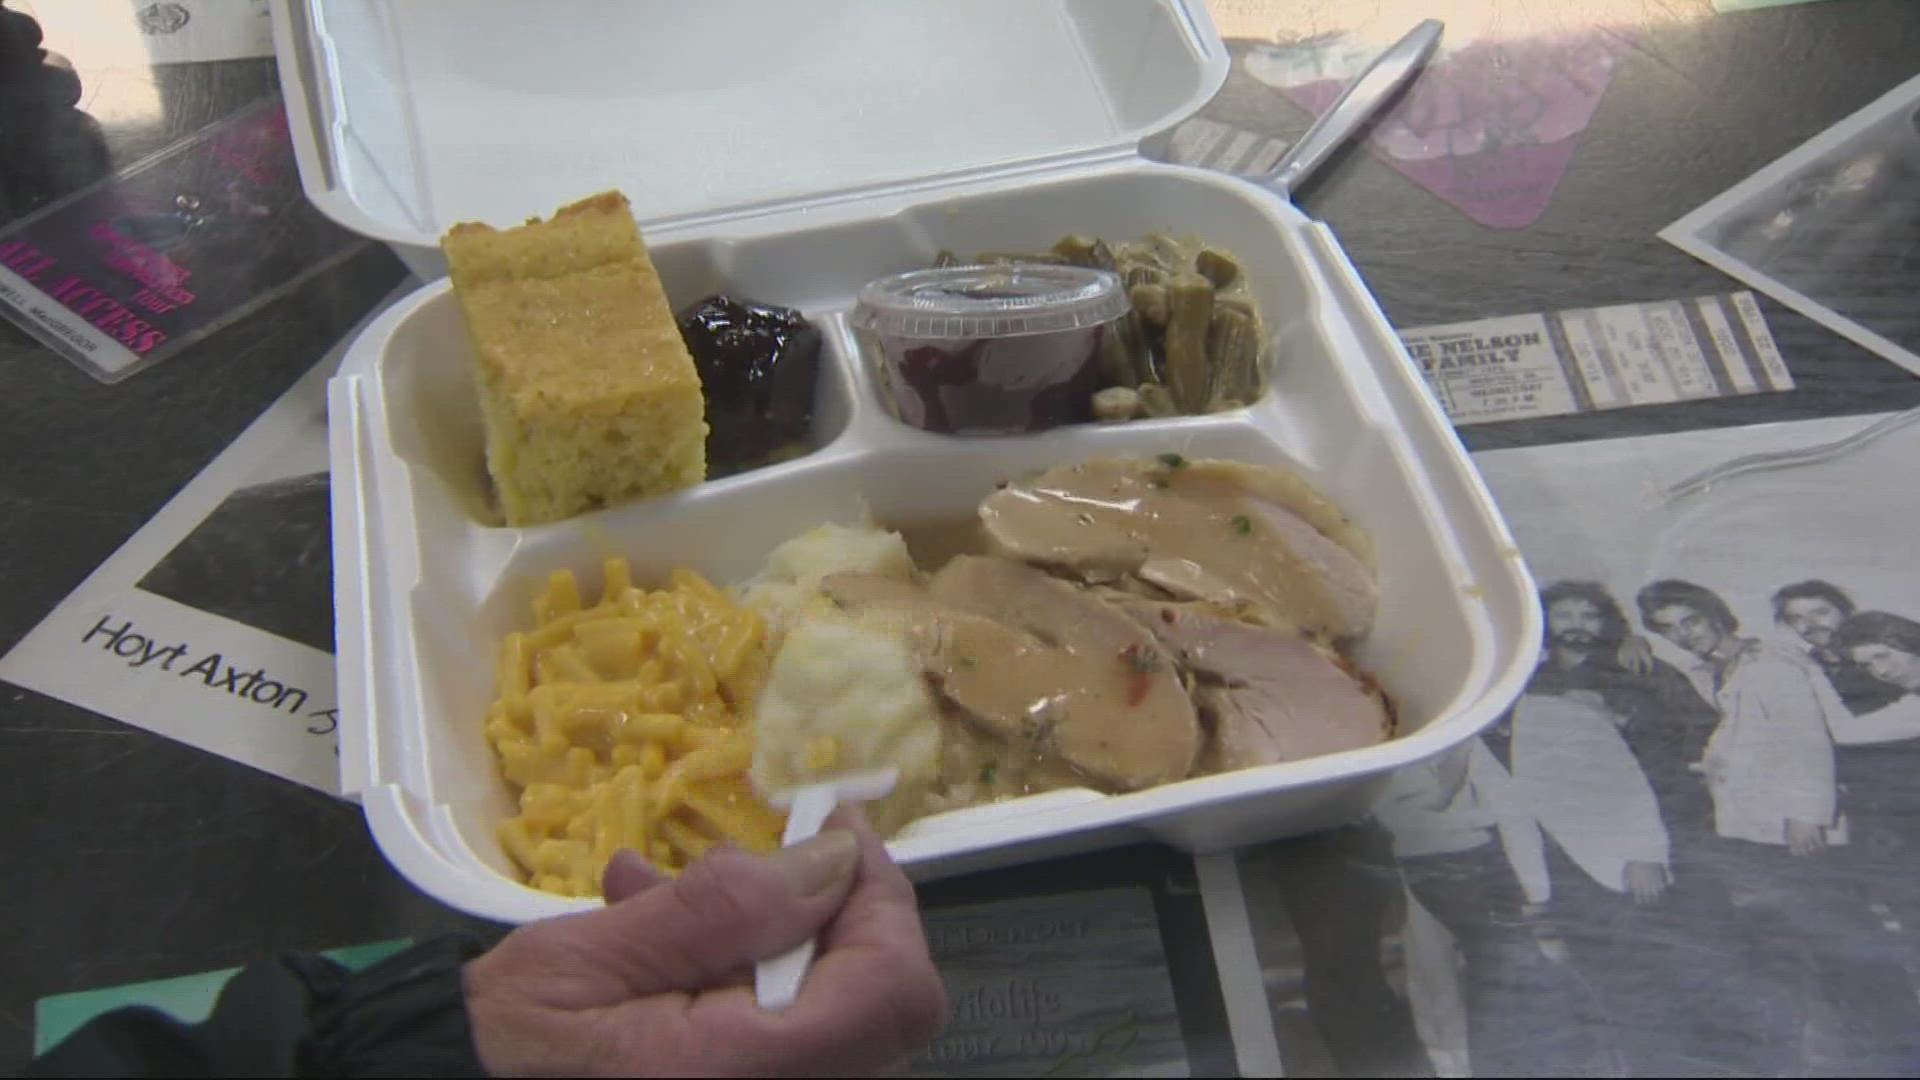 Trap Kitchen prepared an early Thanksgiving meal inside the Roseland Theater. Wednesday afternoon, for those in need.